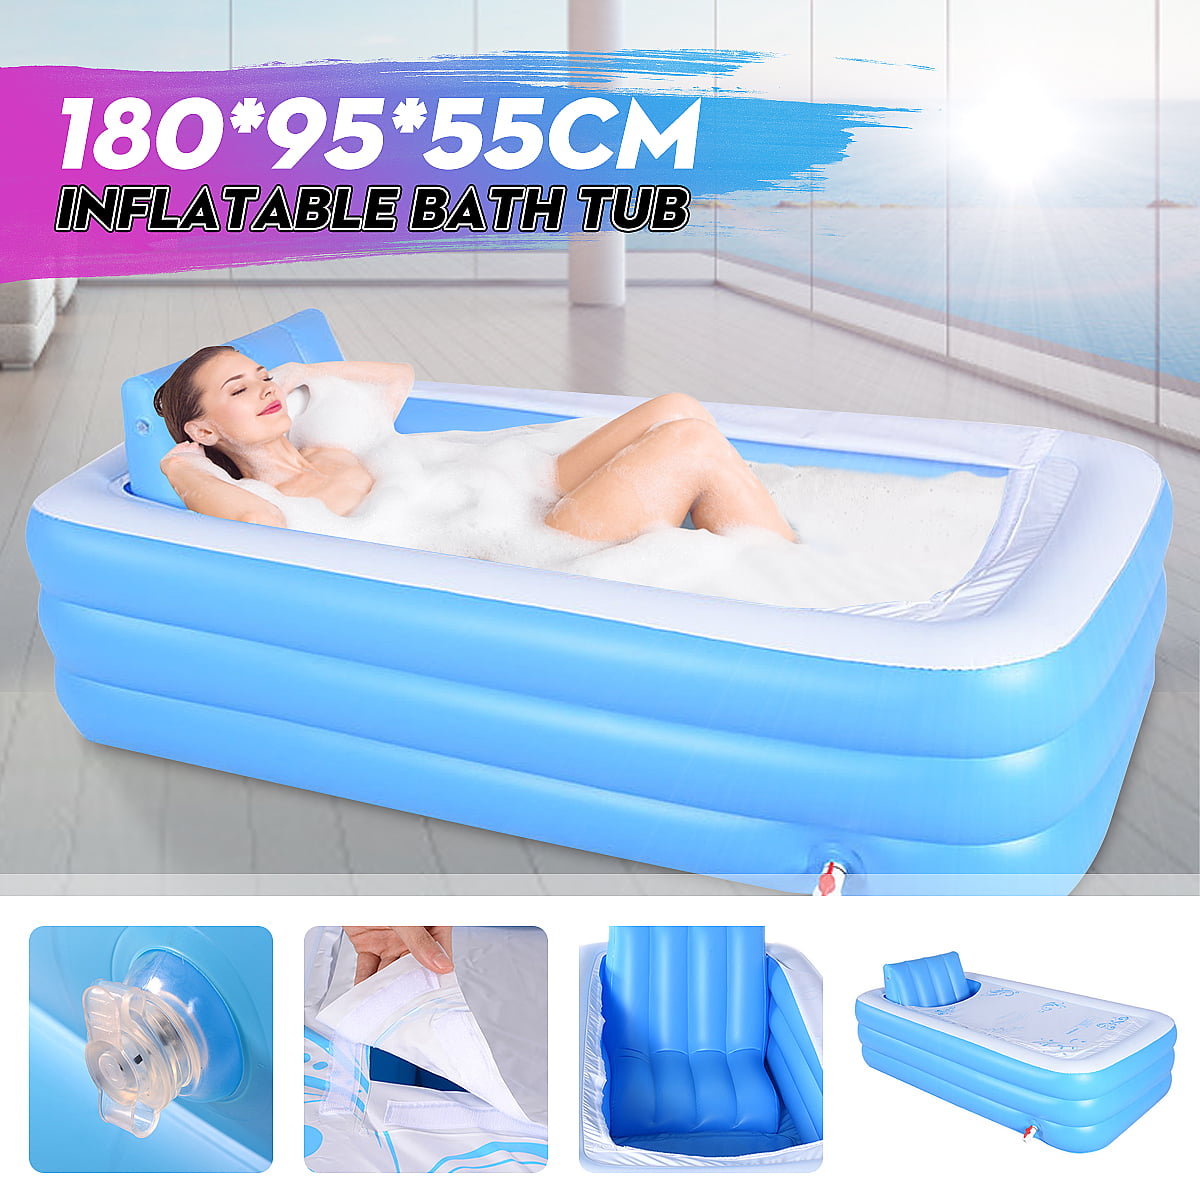 Stoneway Inflatable Free Standing Blow Up Bathtub With Foldable Portable For Adult Spa